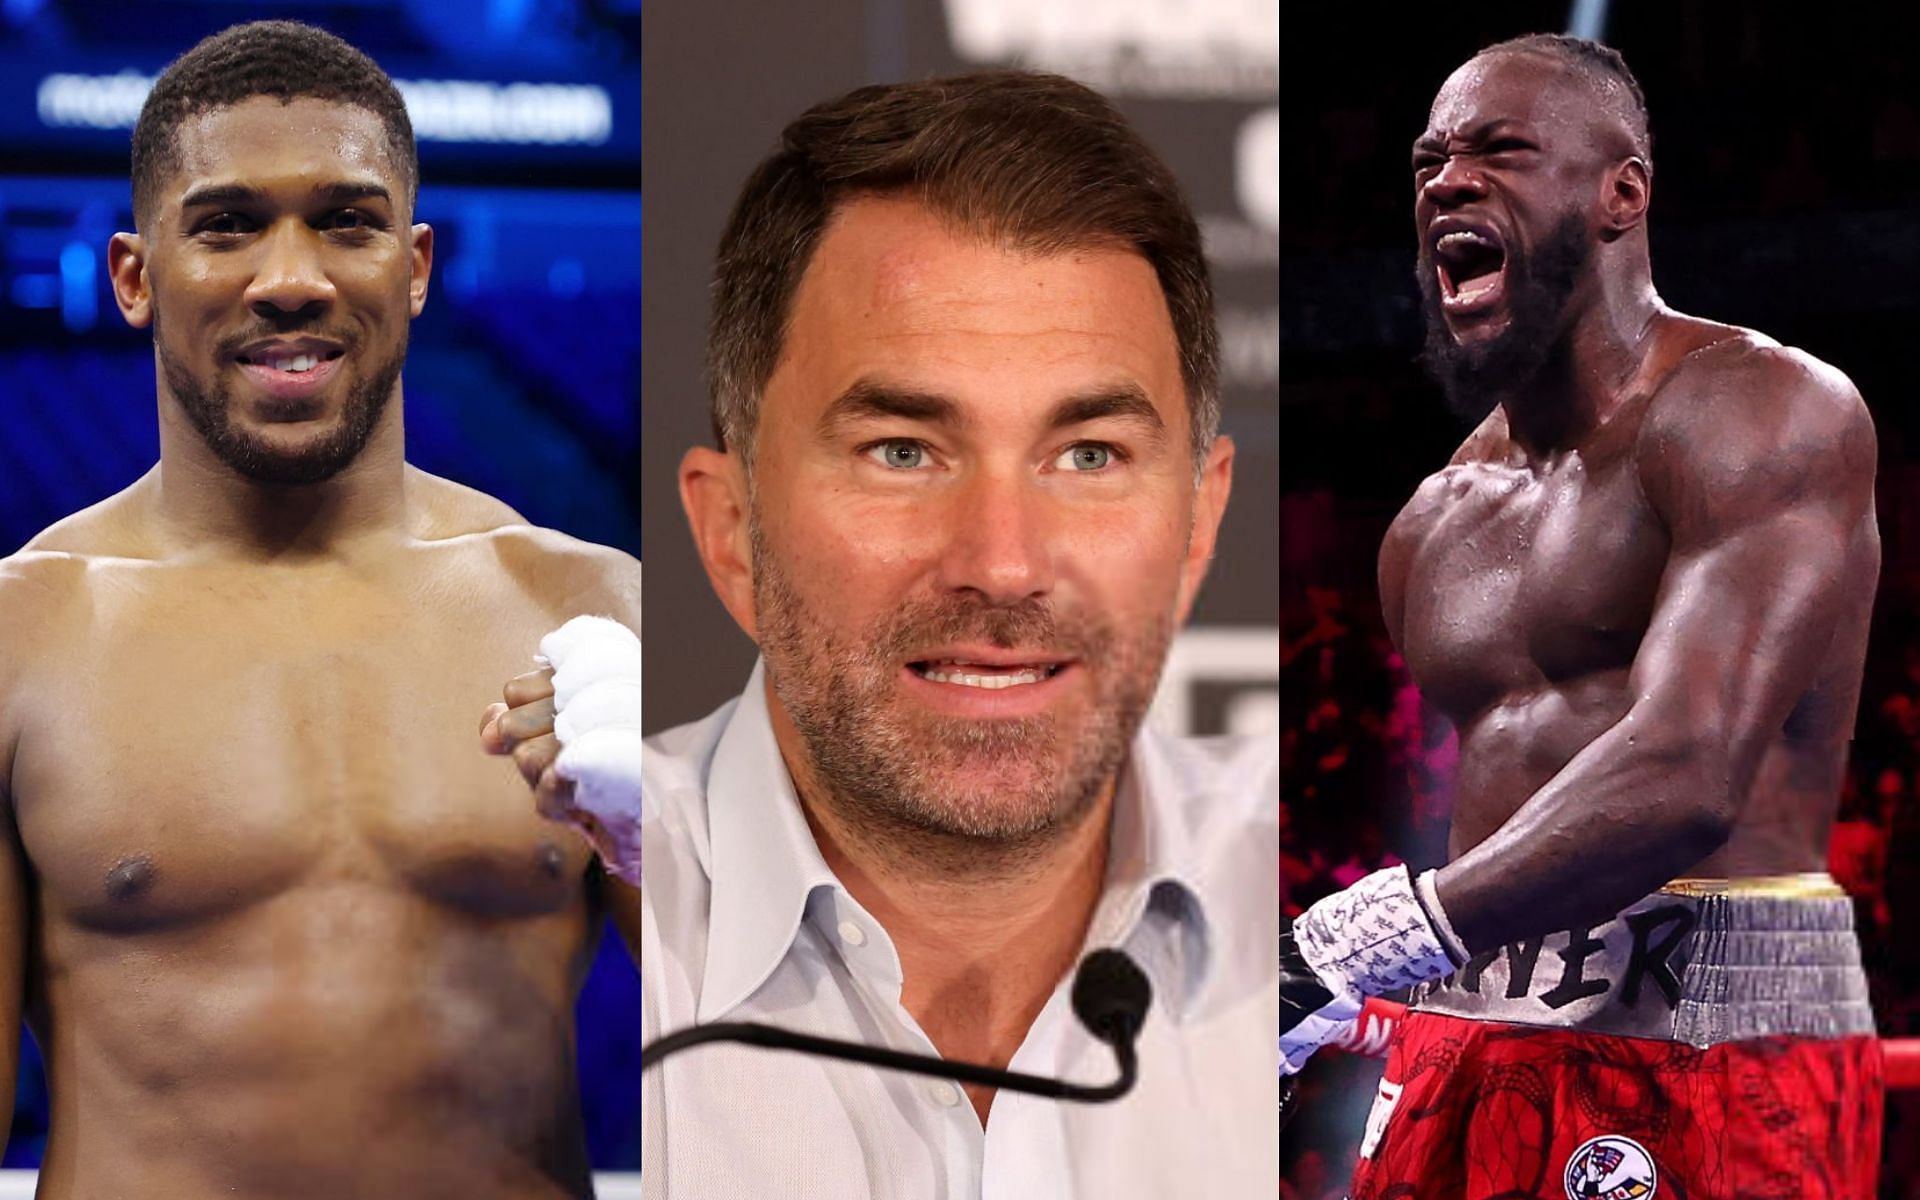 Anthony Joshua (left), Eddie Hearn (middle) and Deontay Wilder (right) [Images Courtesy: @GettyImages]